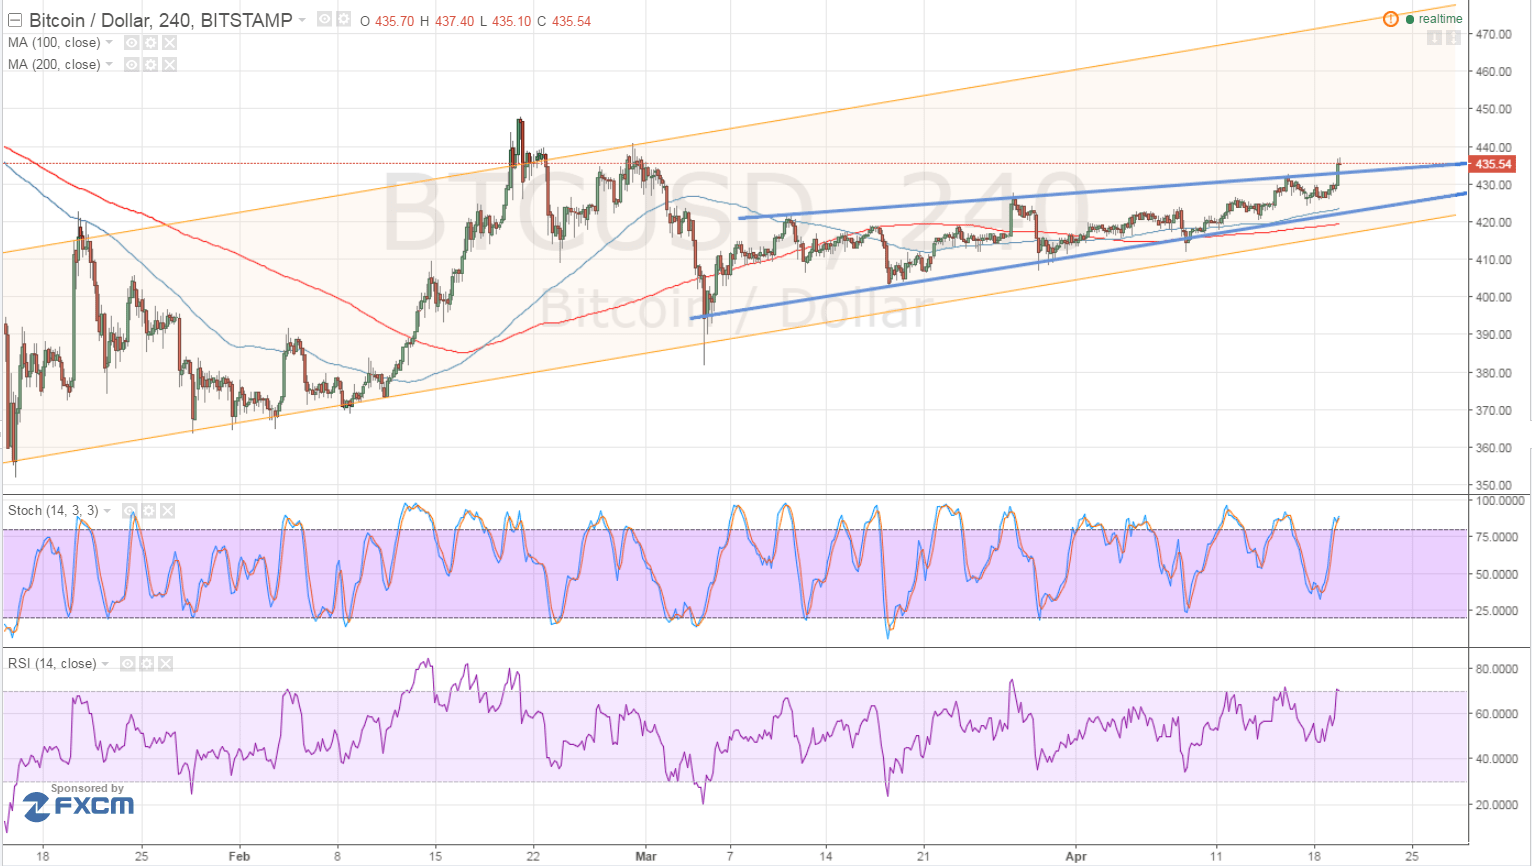 Bitcoin Price Technical Analysis for 04/20/2016 - Upside Breakout, Where to Next?